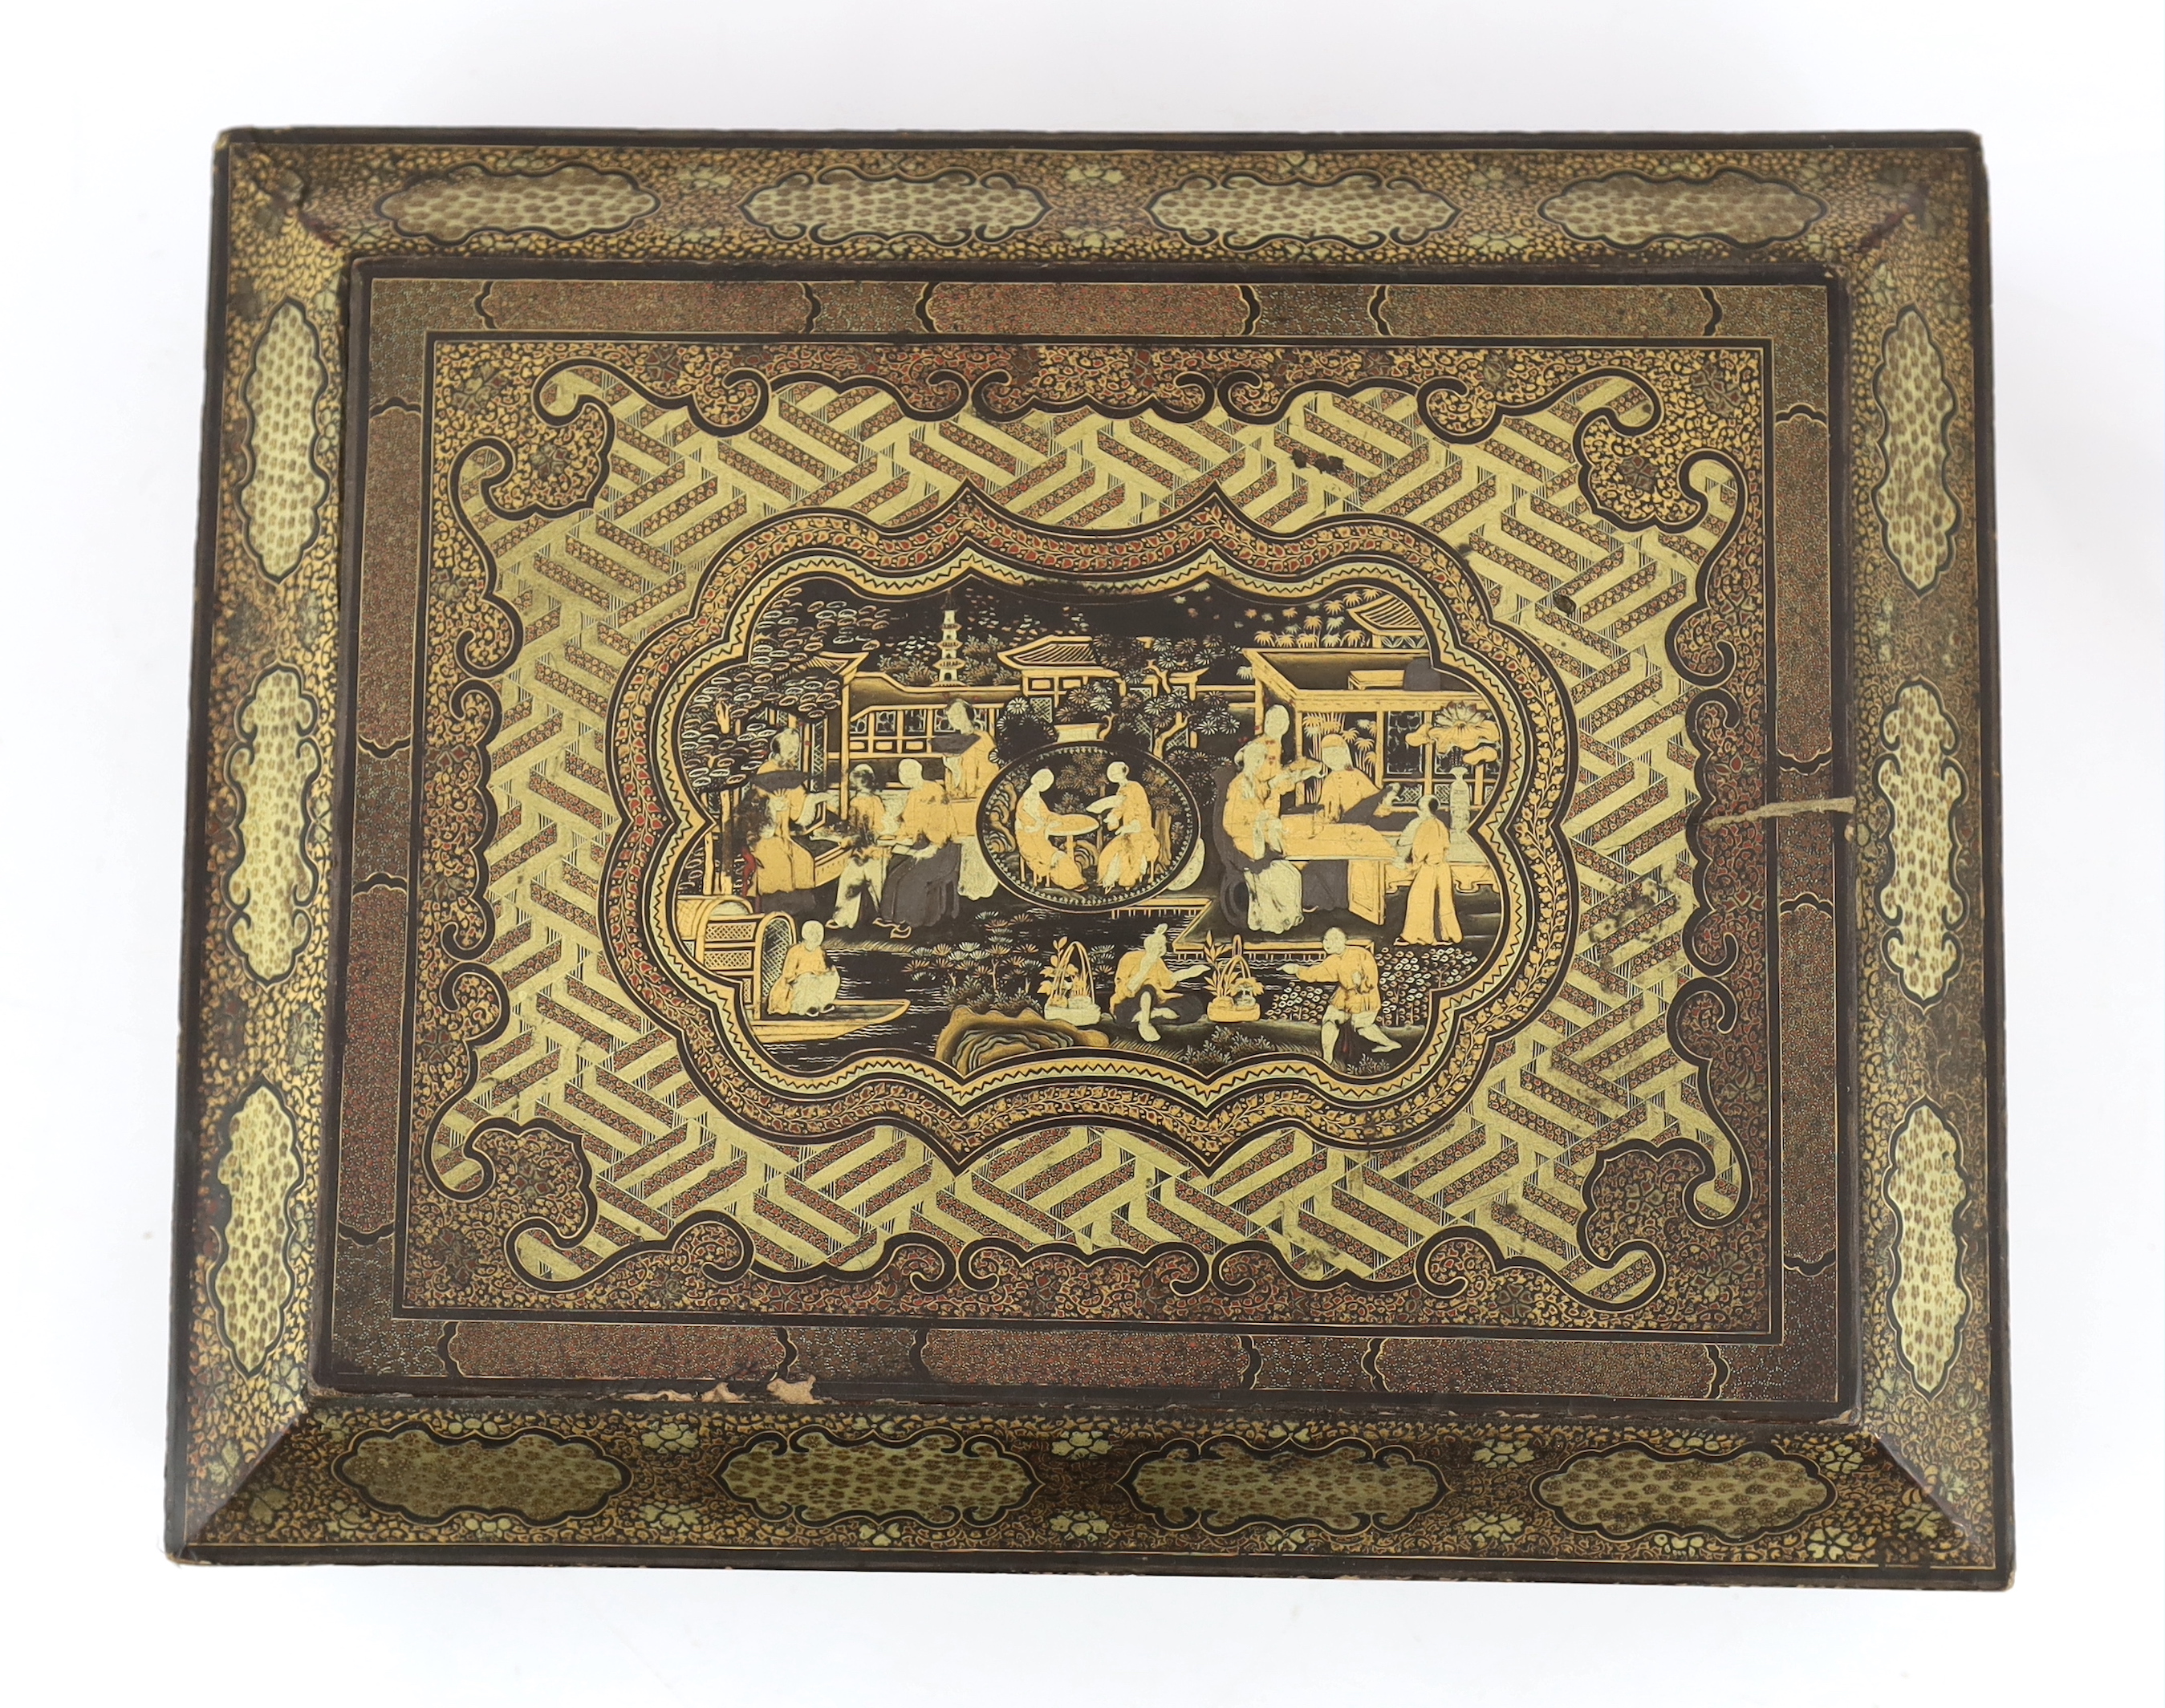 A Chinese gilt-decorated black lacquer games box, mid 19th century